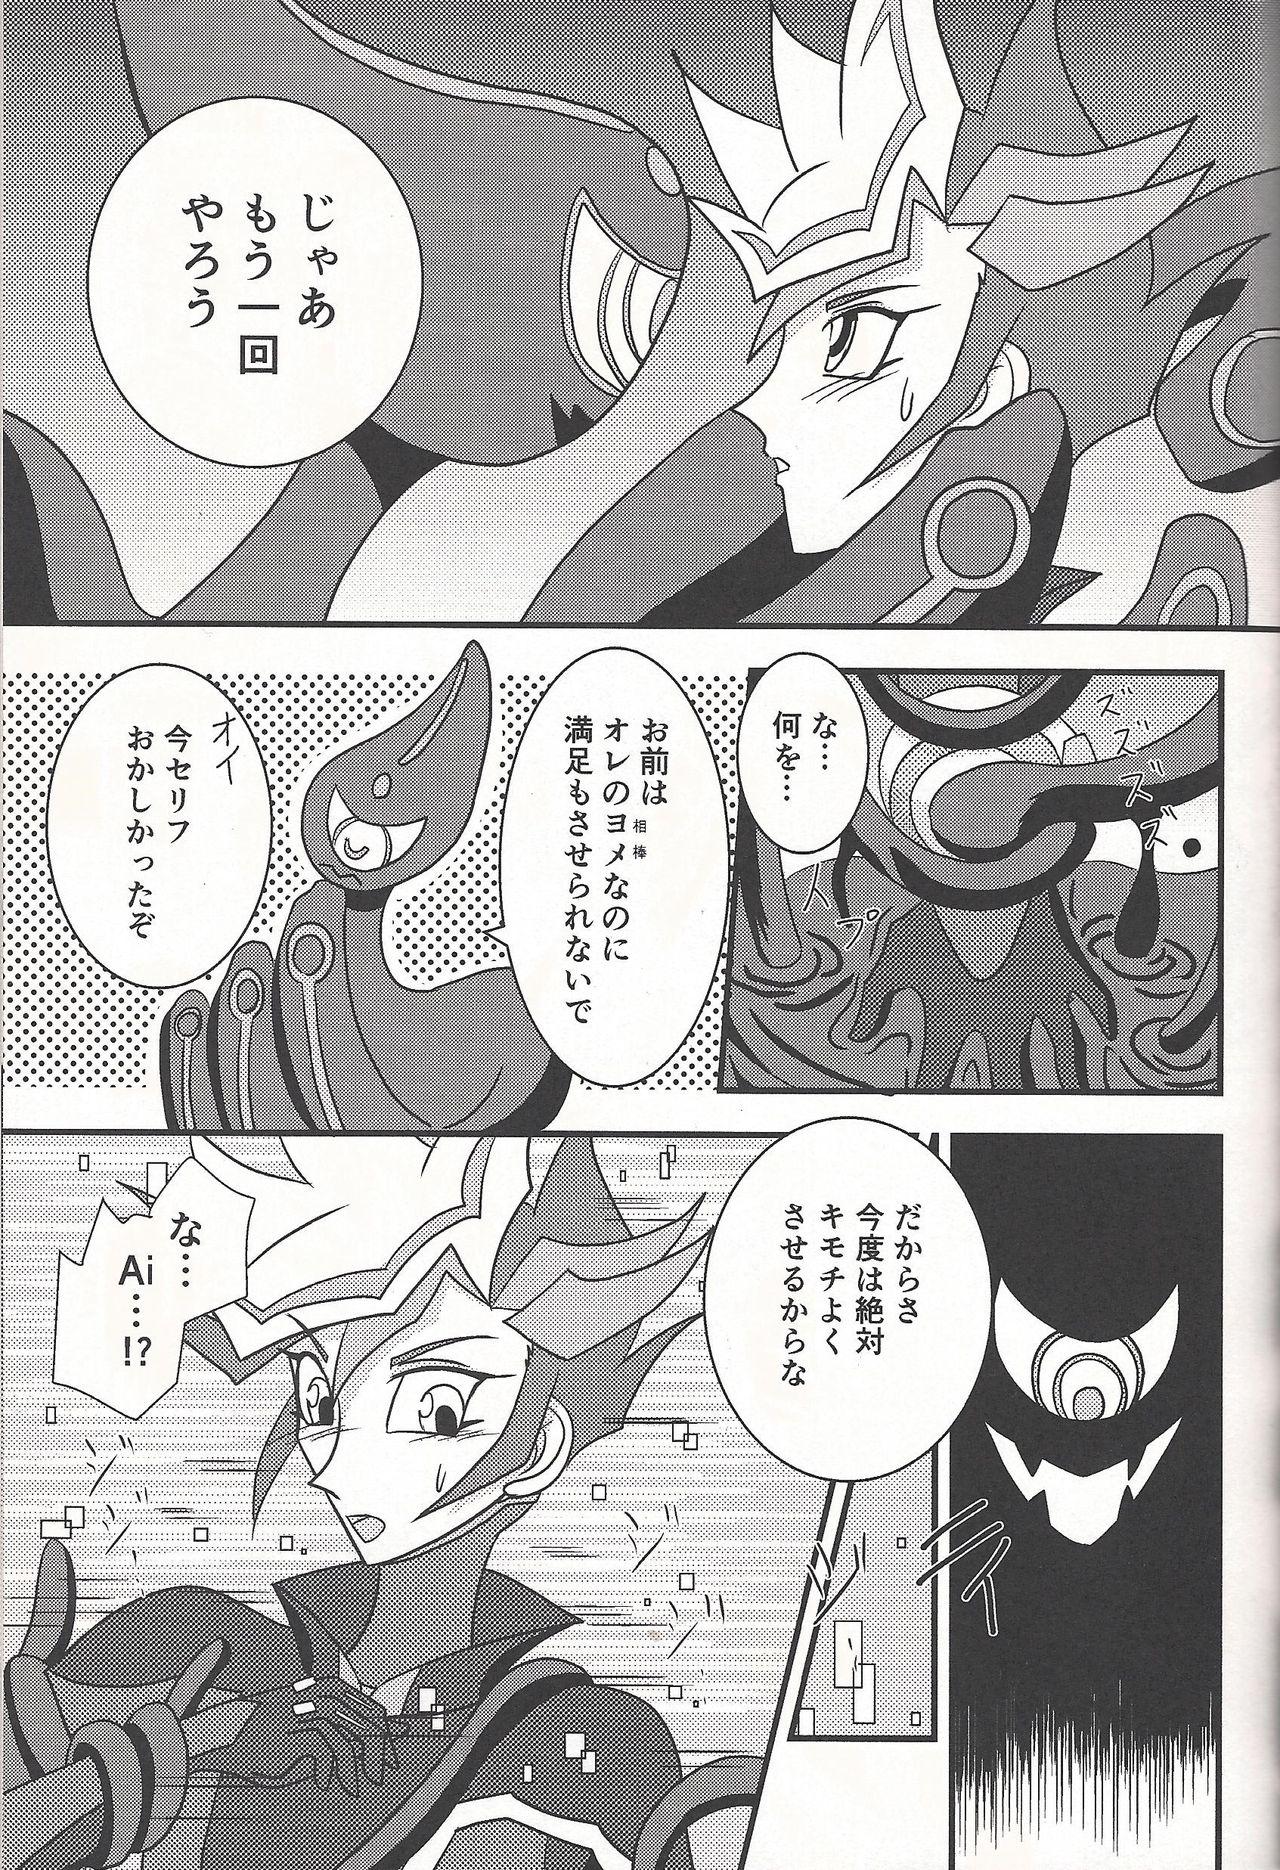 Girlfriends Mirrors gate - Yu gi oh vrains Juicy - Page 8